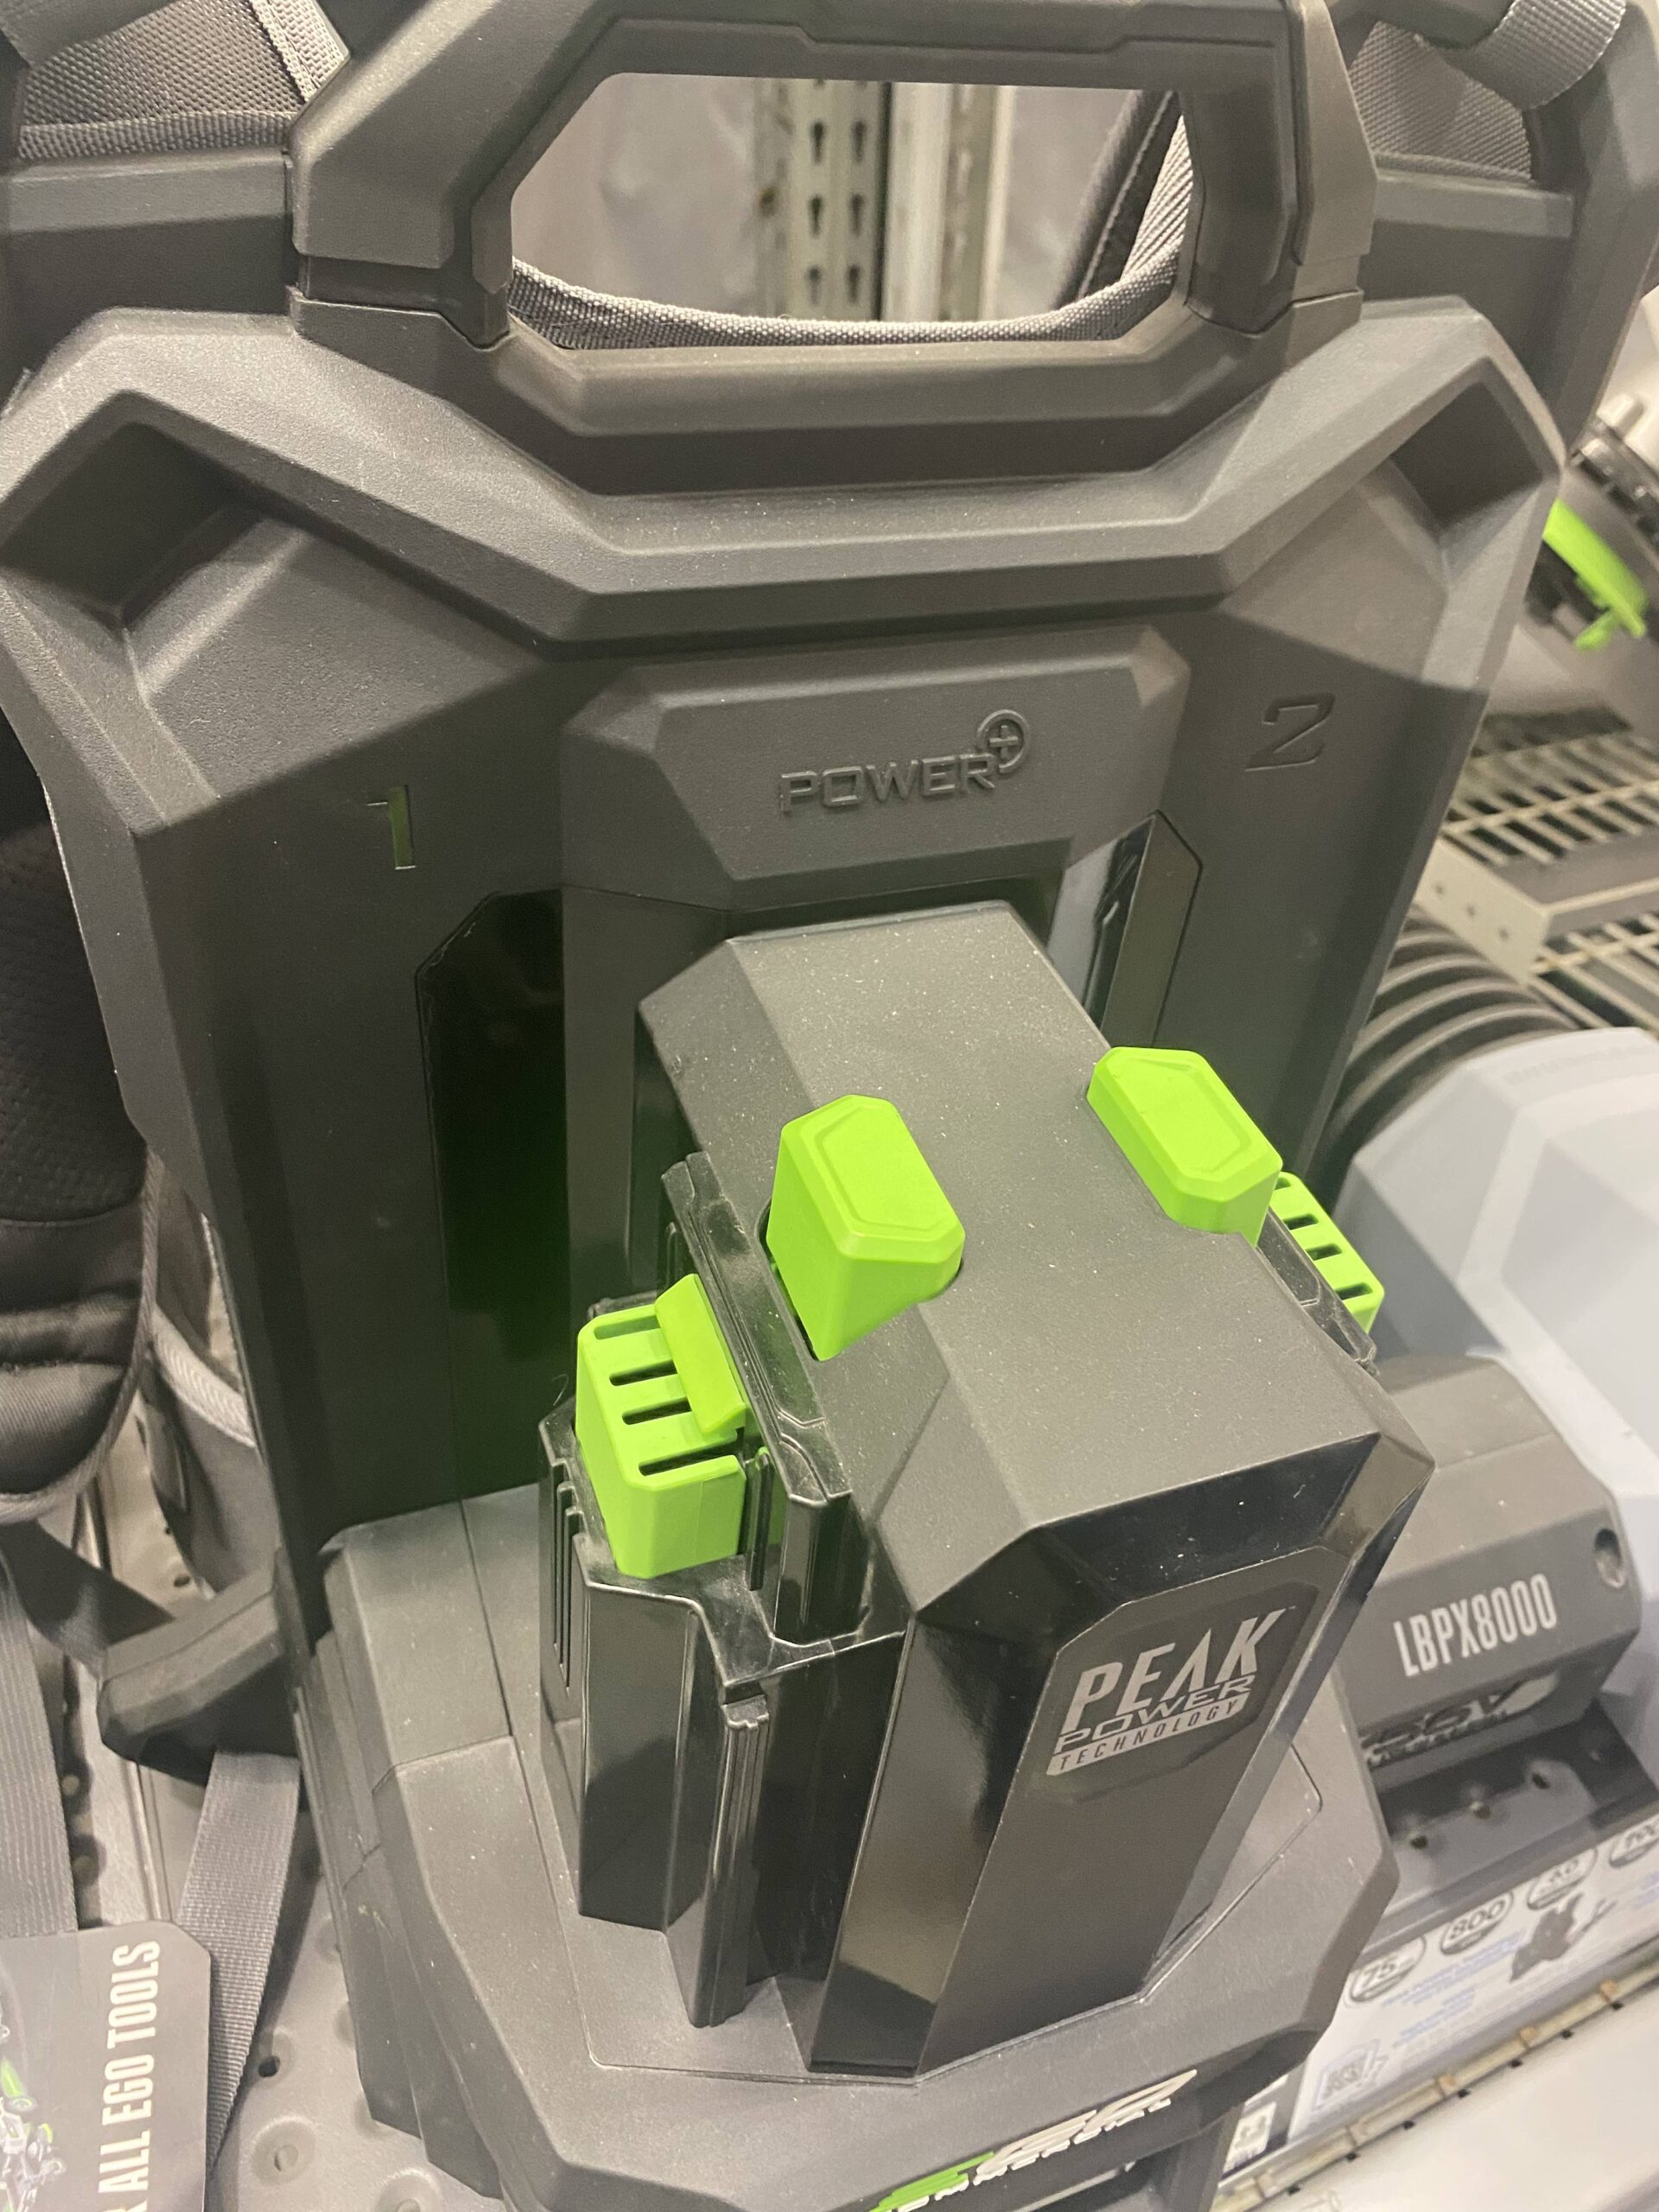 ego backpack blower at Lowes